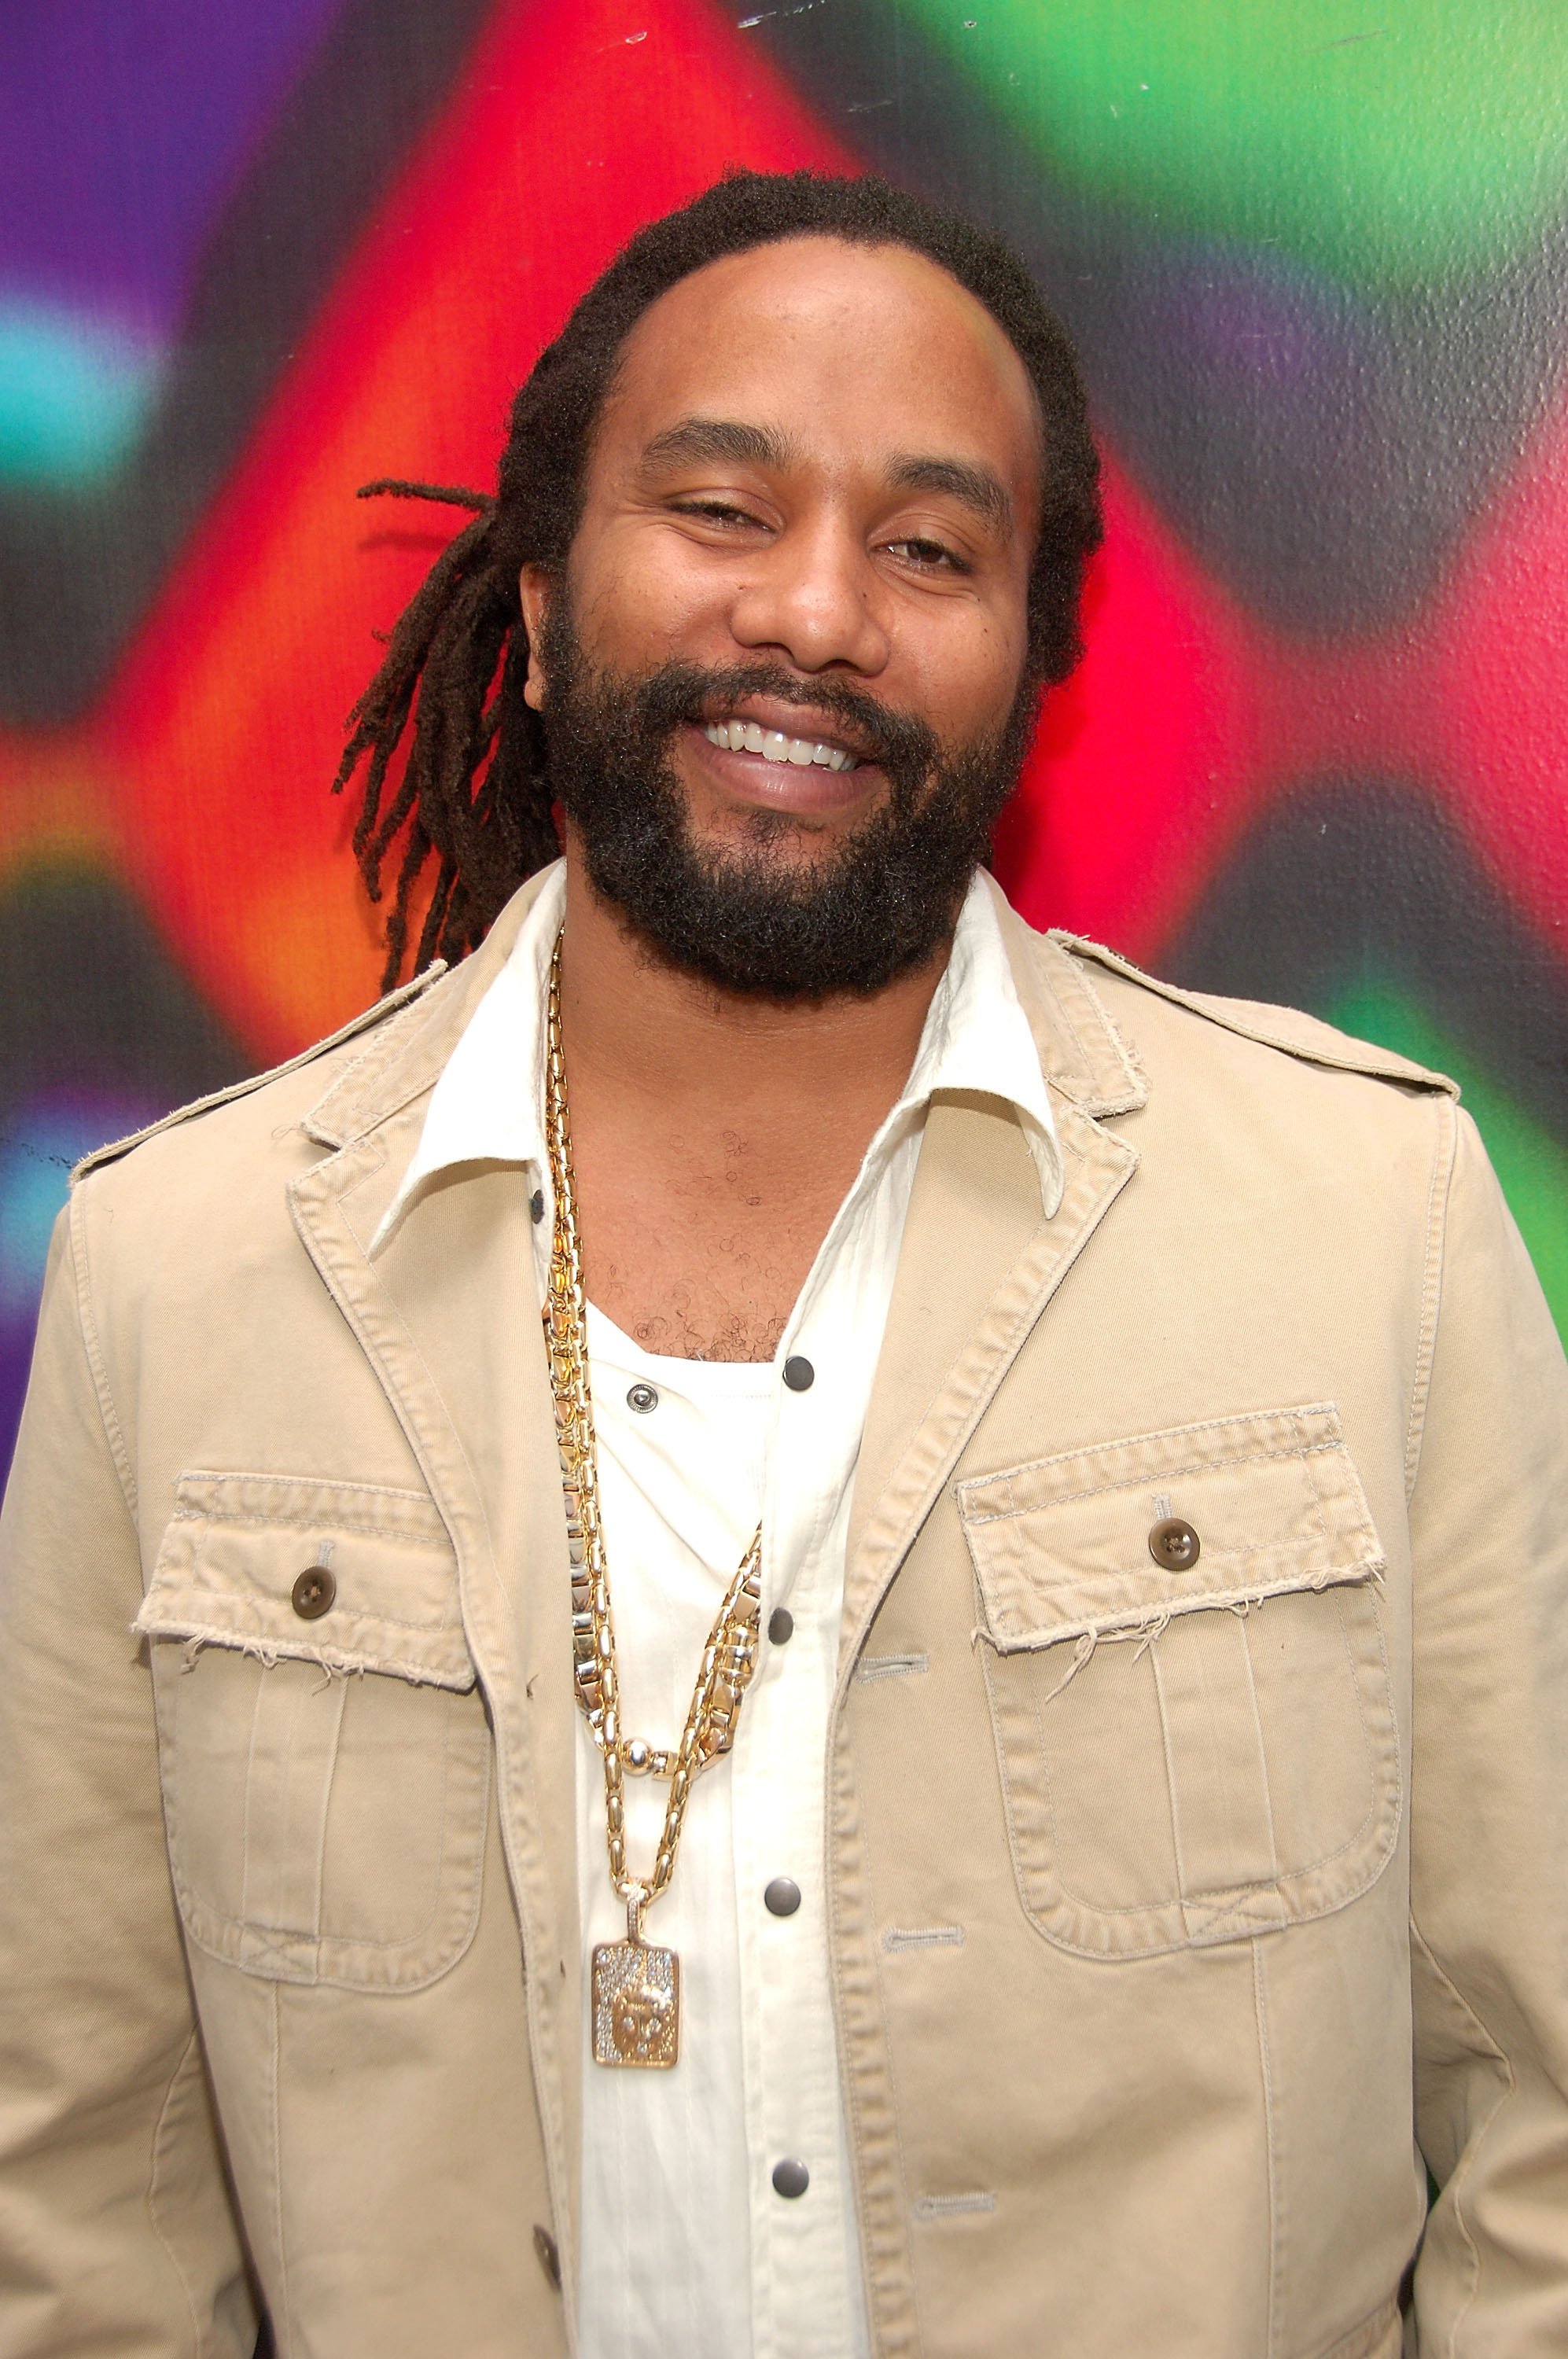 Kymani Marley on MTV2's "Sucker Free" on November 14, 2007 | Source: Getty Images